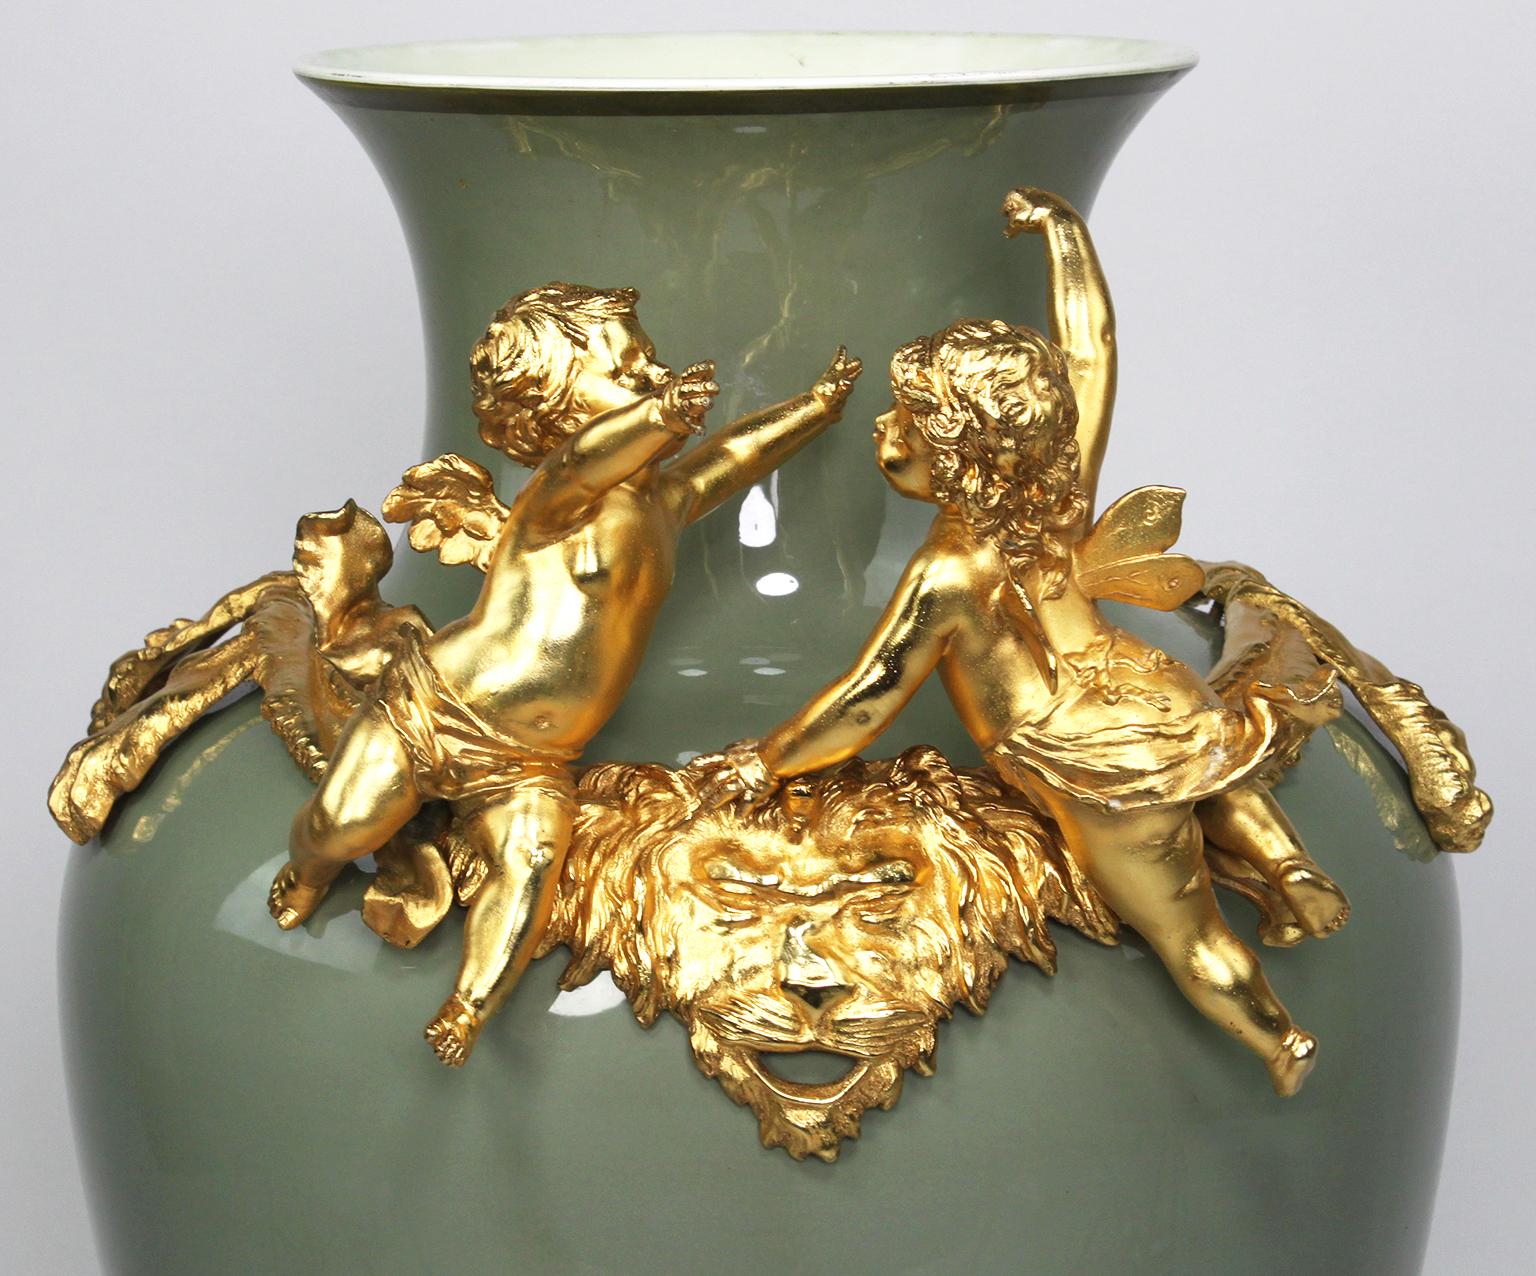 A continental 19th-20th century Romantic style porcelain and gilt metal mounted figural vase, probably French. The ovoid artichoke green porcelain body surmounted with a pair of hovering cherubs over a lion pelt, raised on scrolled feet. The